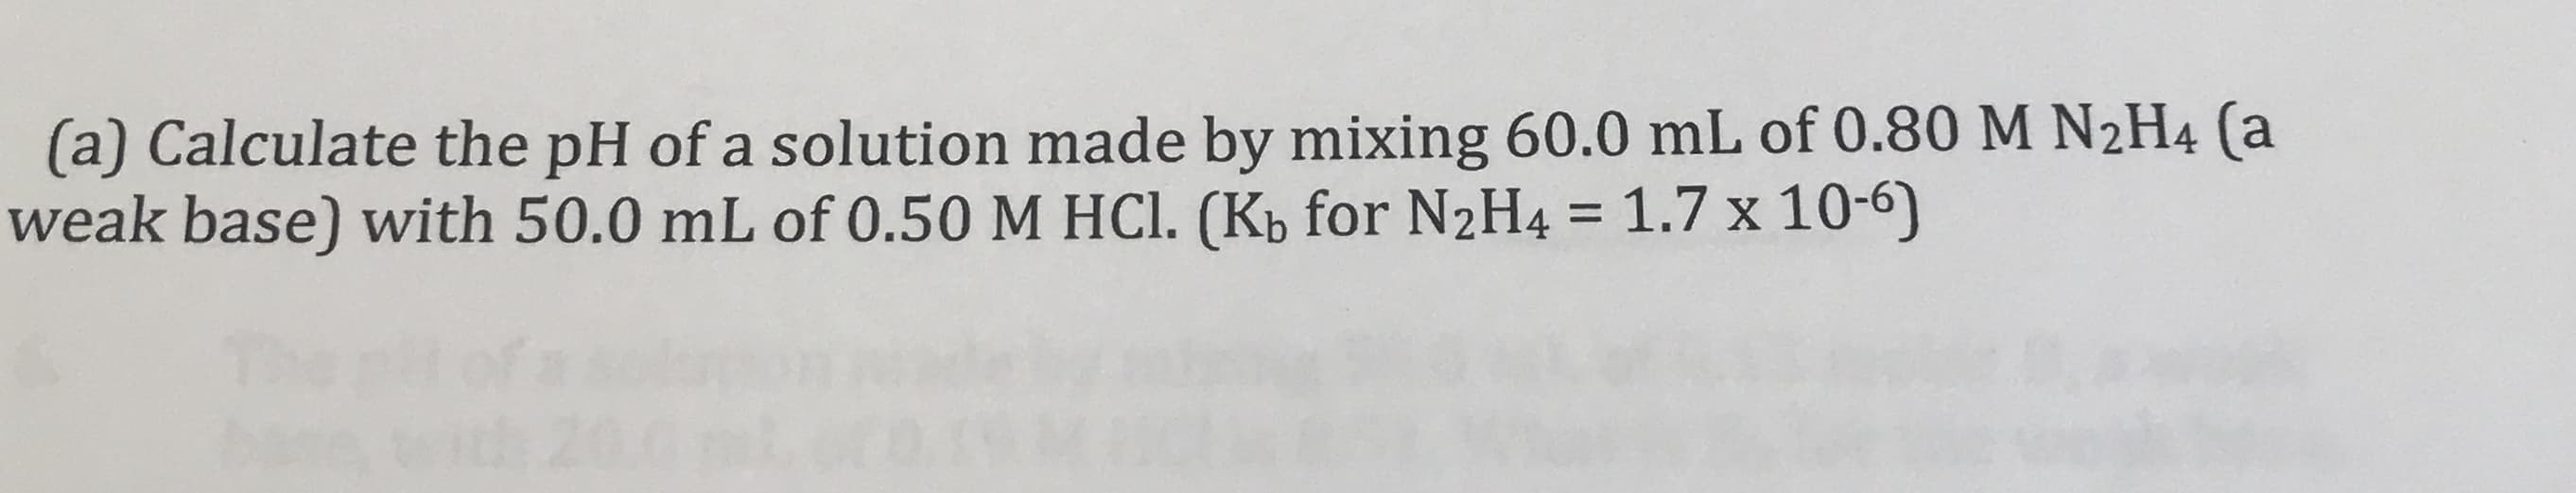 (a) Calculate the pH of a solution made by mixing 60.0 mL of 0.80 M N2H4 (a
weak base) with 50.0 mL of 0.50 M HCl. (Kb for N2H4 = 1.7 x 10-6)
%3D
